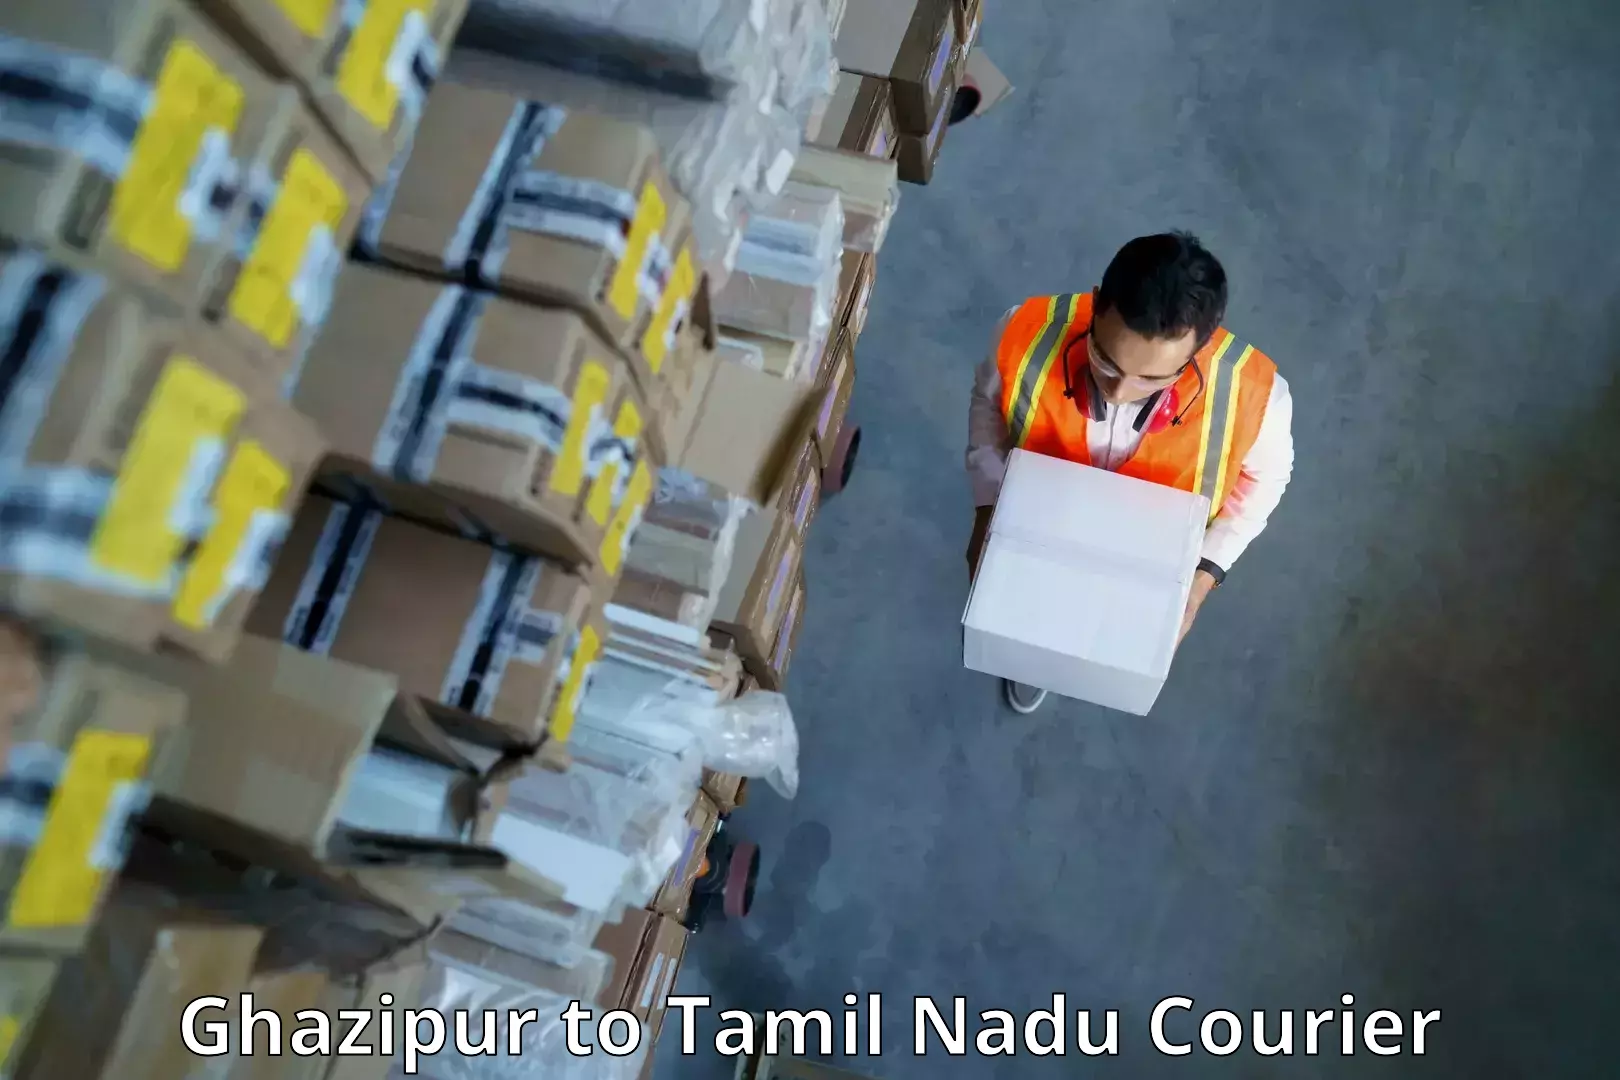 Next-day delivery options Ghazipur to Perambur